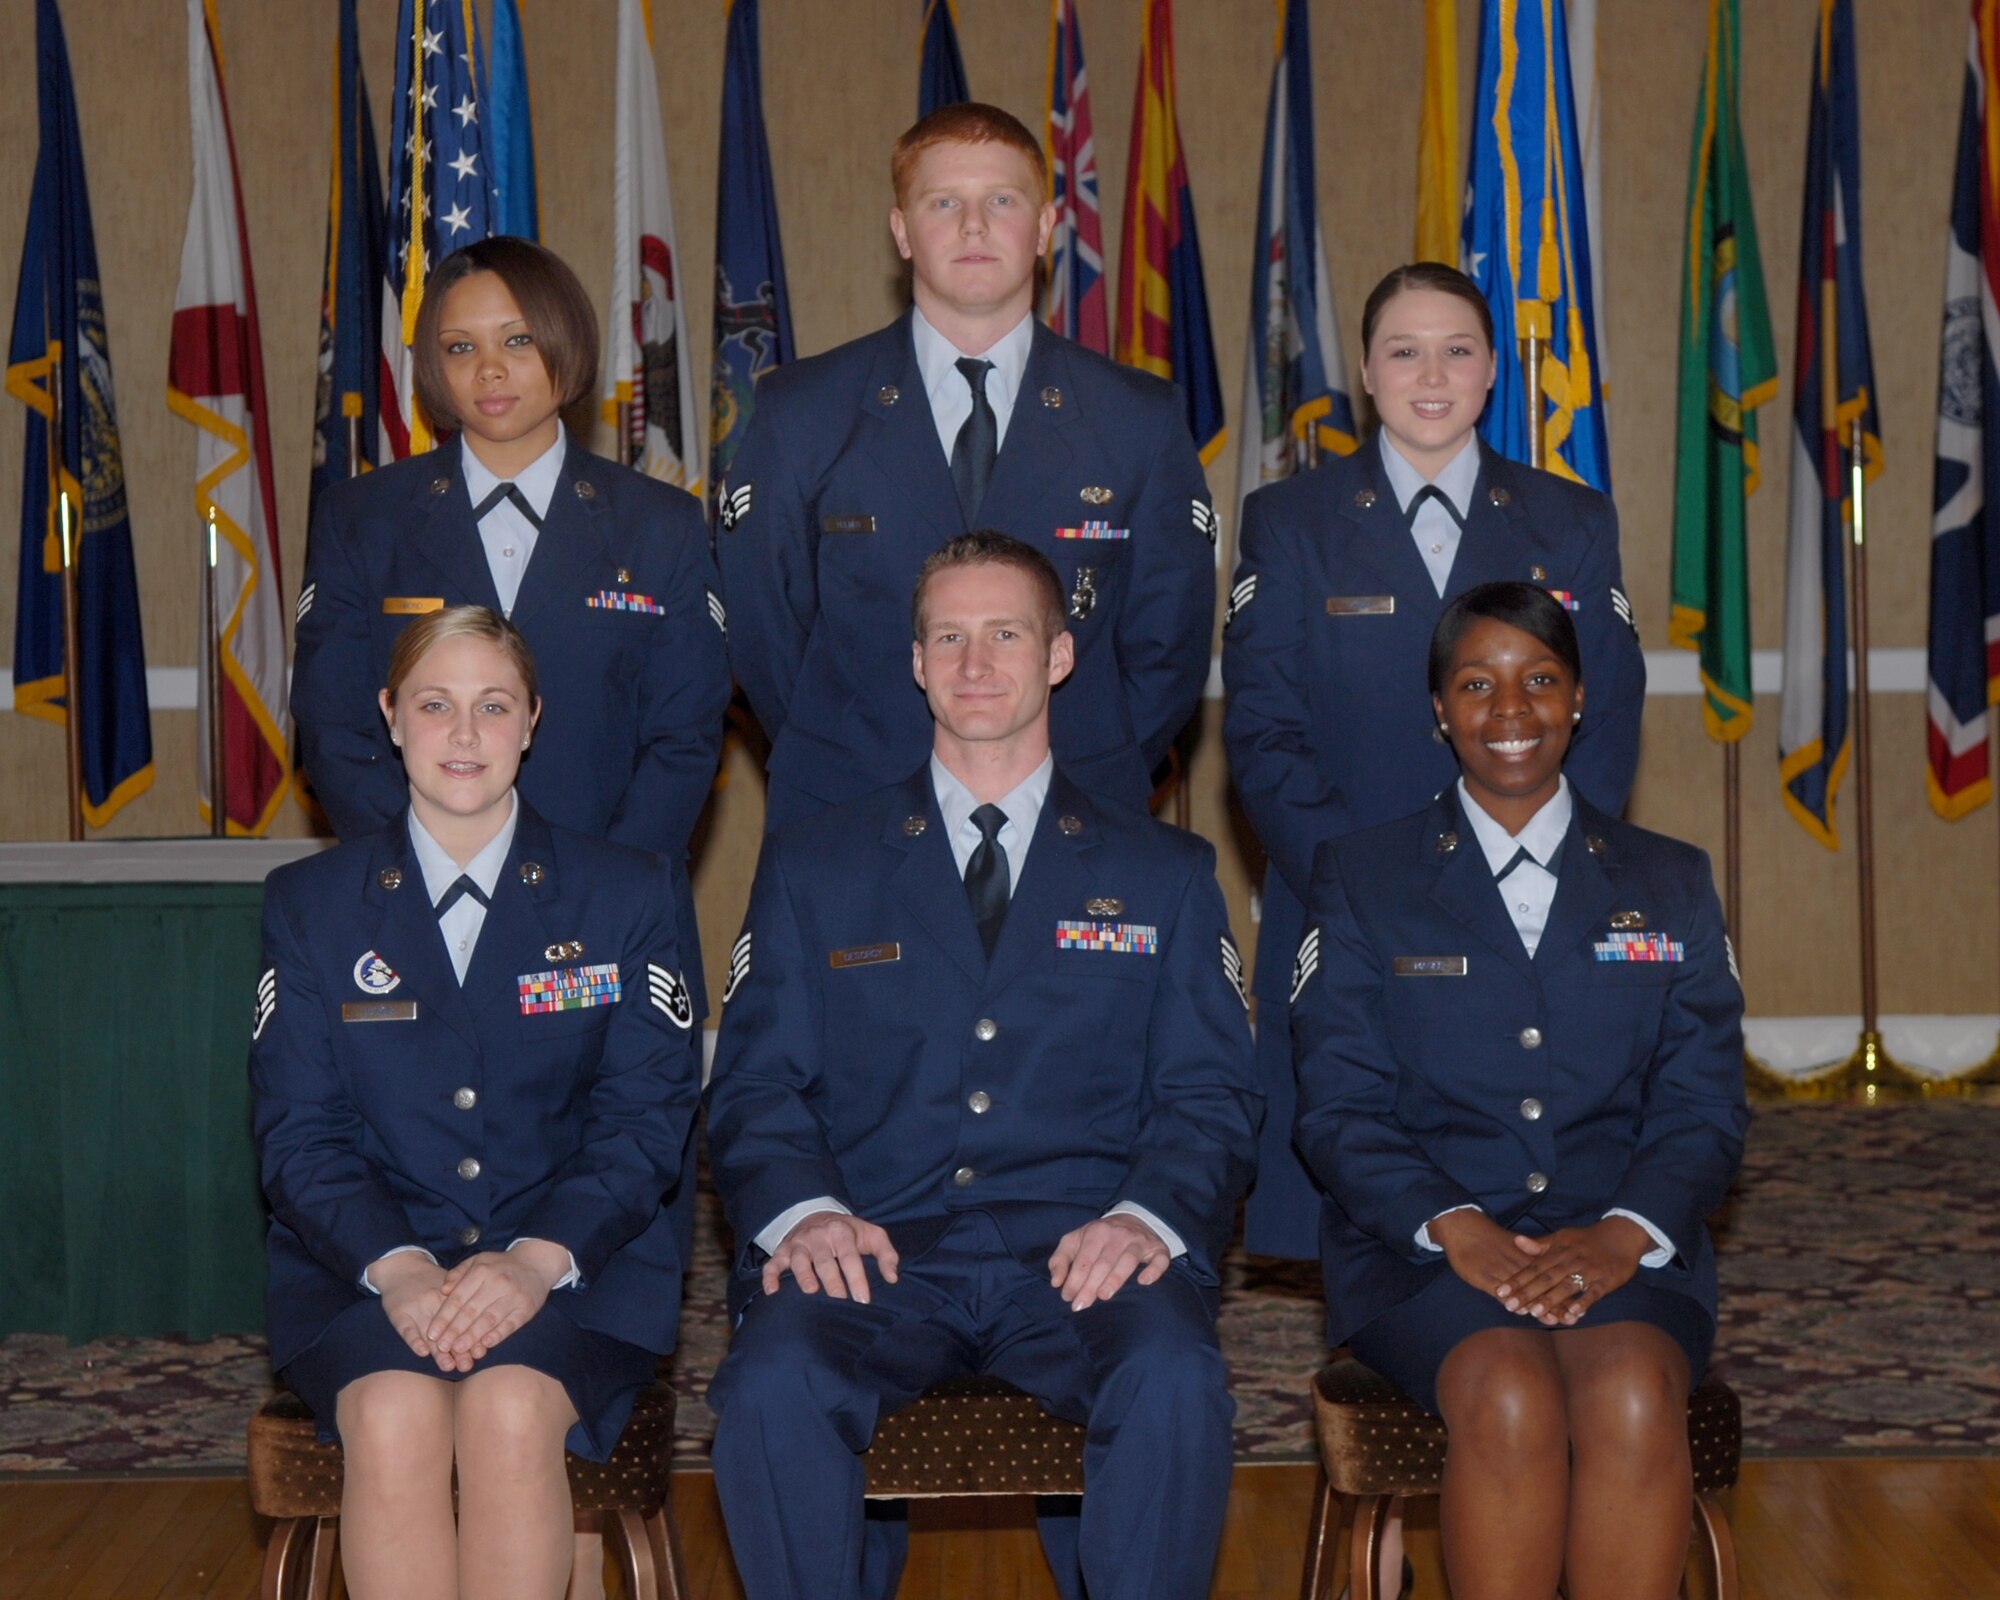 The 14th Flying Training Wing congratulates the March enlisted promotees. Pictured are: (front row) to Staff Sgt.: Sherri Tucker, 14th Operations Support Squadron; Justin Desorcy, 14th Communications Squadron; Marquita Magee, 14th OSS; (back row): to Senior Airman: Jessica Bond, 14th Medical Operations Squadron; Nicholas Homer, 14th Civil Engineer Squadron; and Jessica Kerr, 14th Medical Support Squadron. (U.S. Air Force photo by Melissa Duncan)